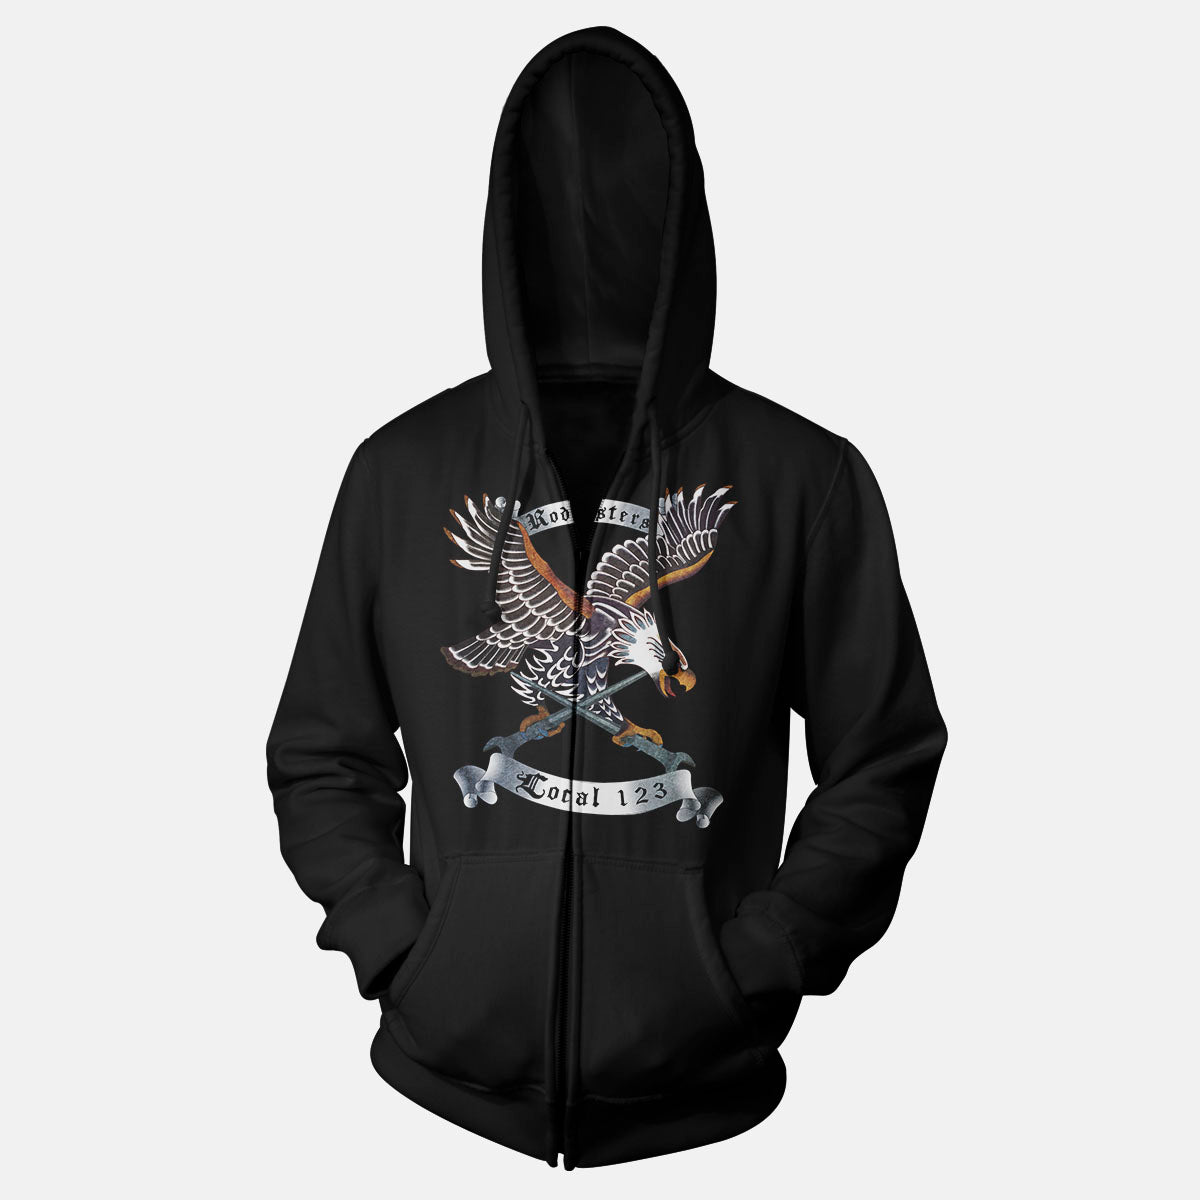 IW Rodbusters Eagle Union Apparel